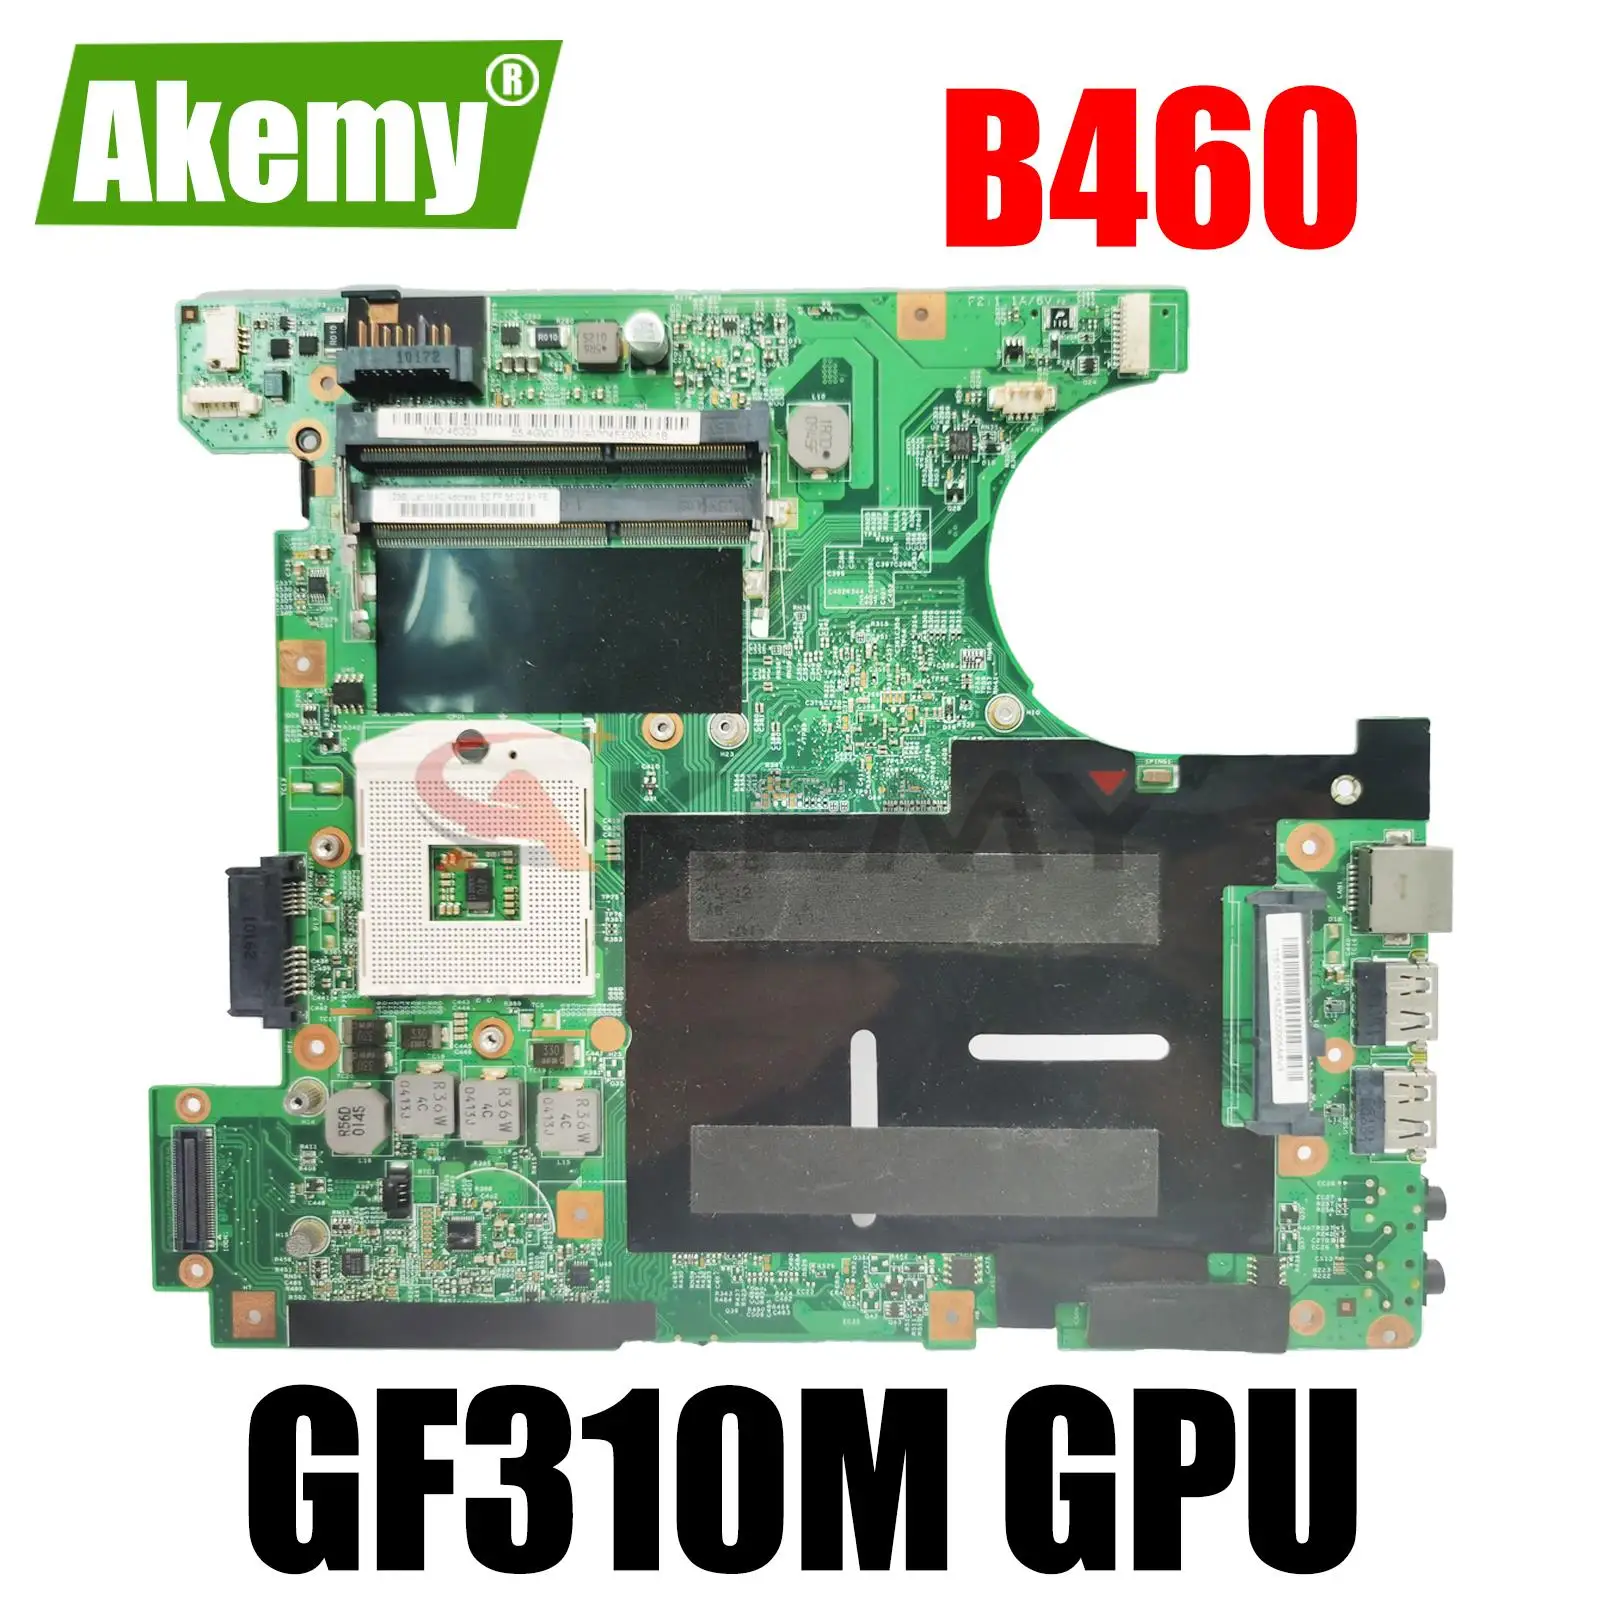 

For Lenovo B460 Laptop Motherboard with GF310M GPU 512M HM55 48.4GV01.01M DDR3 100% Test Work